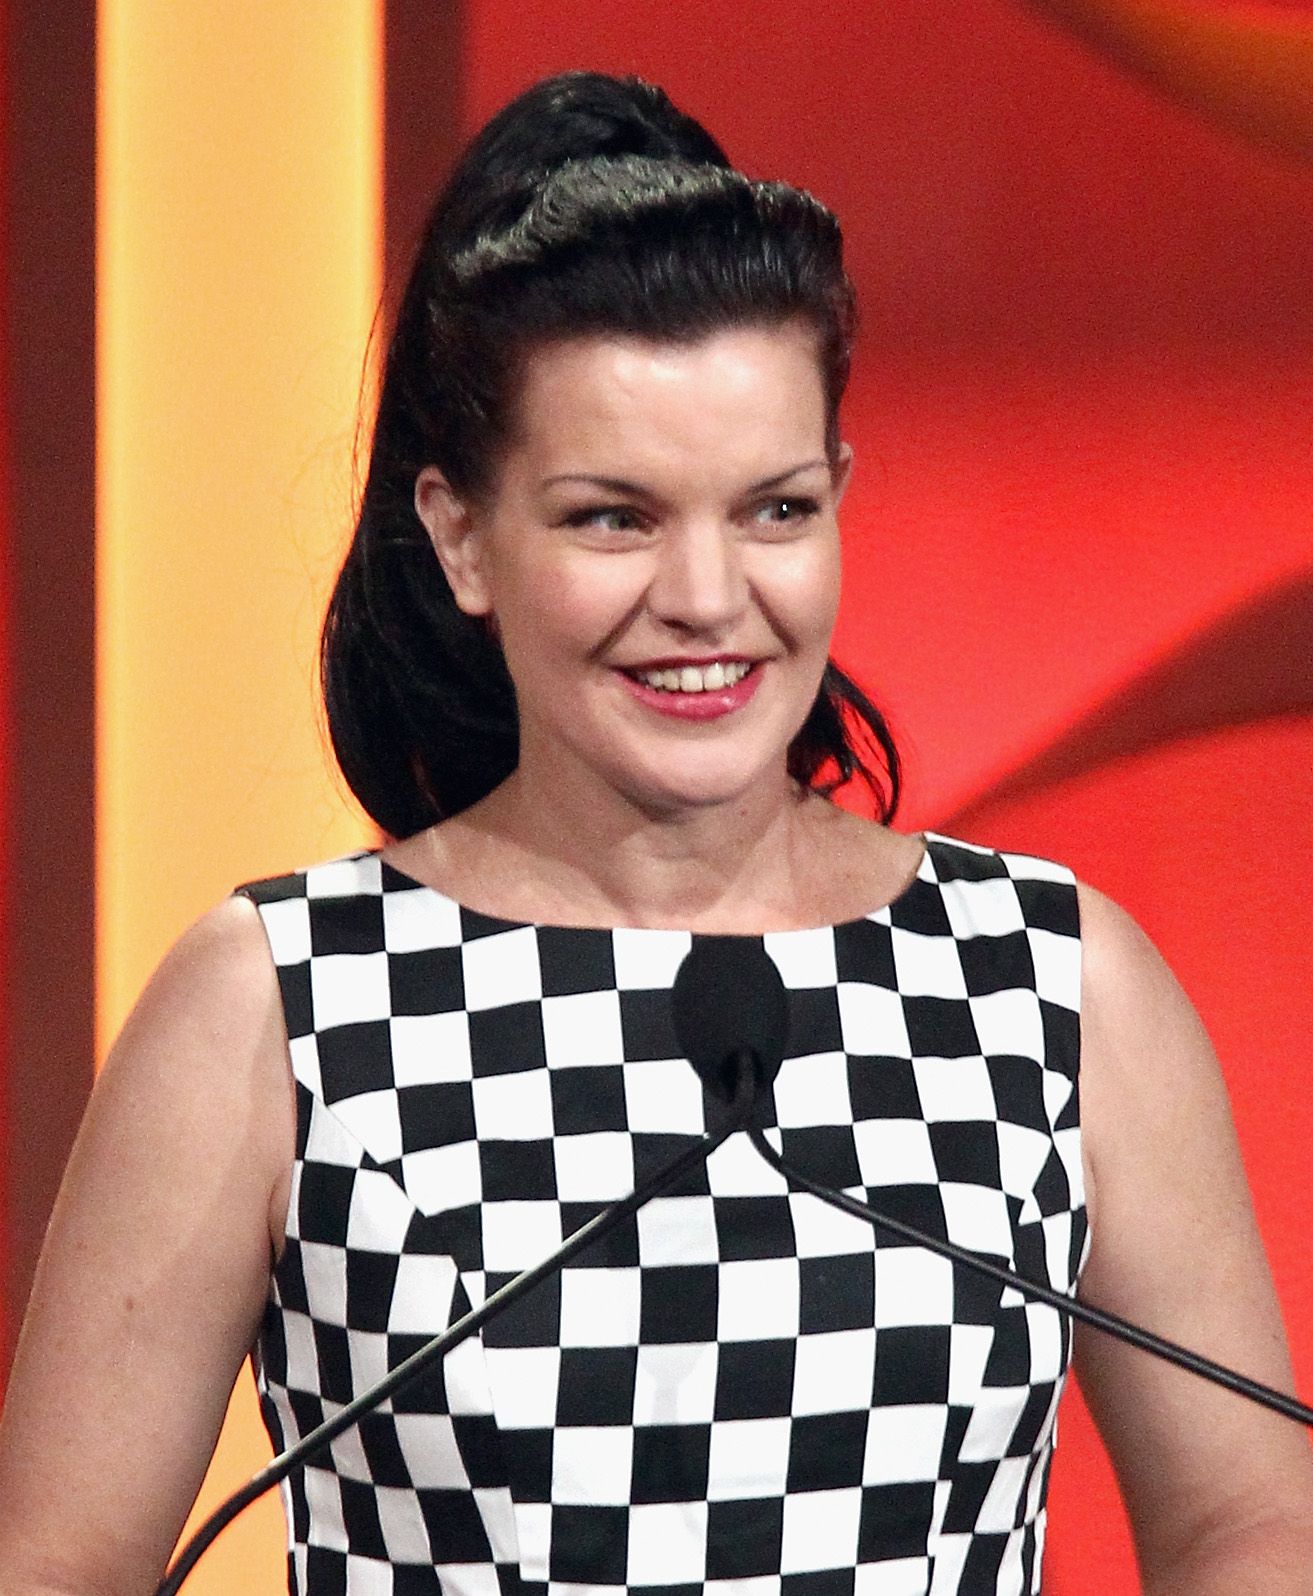 Pauley Perrette during The Trevor Project's 2016 TrevorLIVE LA at The Beverly Hilton Hotel on December 4, 2016 in Beverly Hills, California. | Source: Getty Images